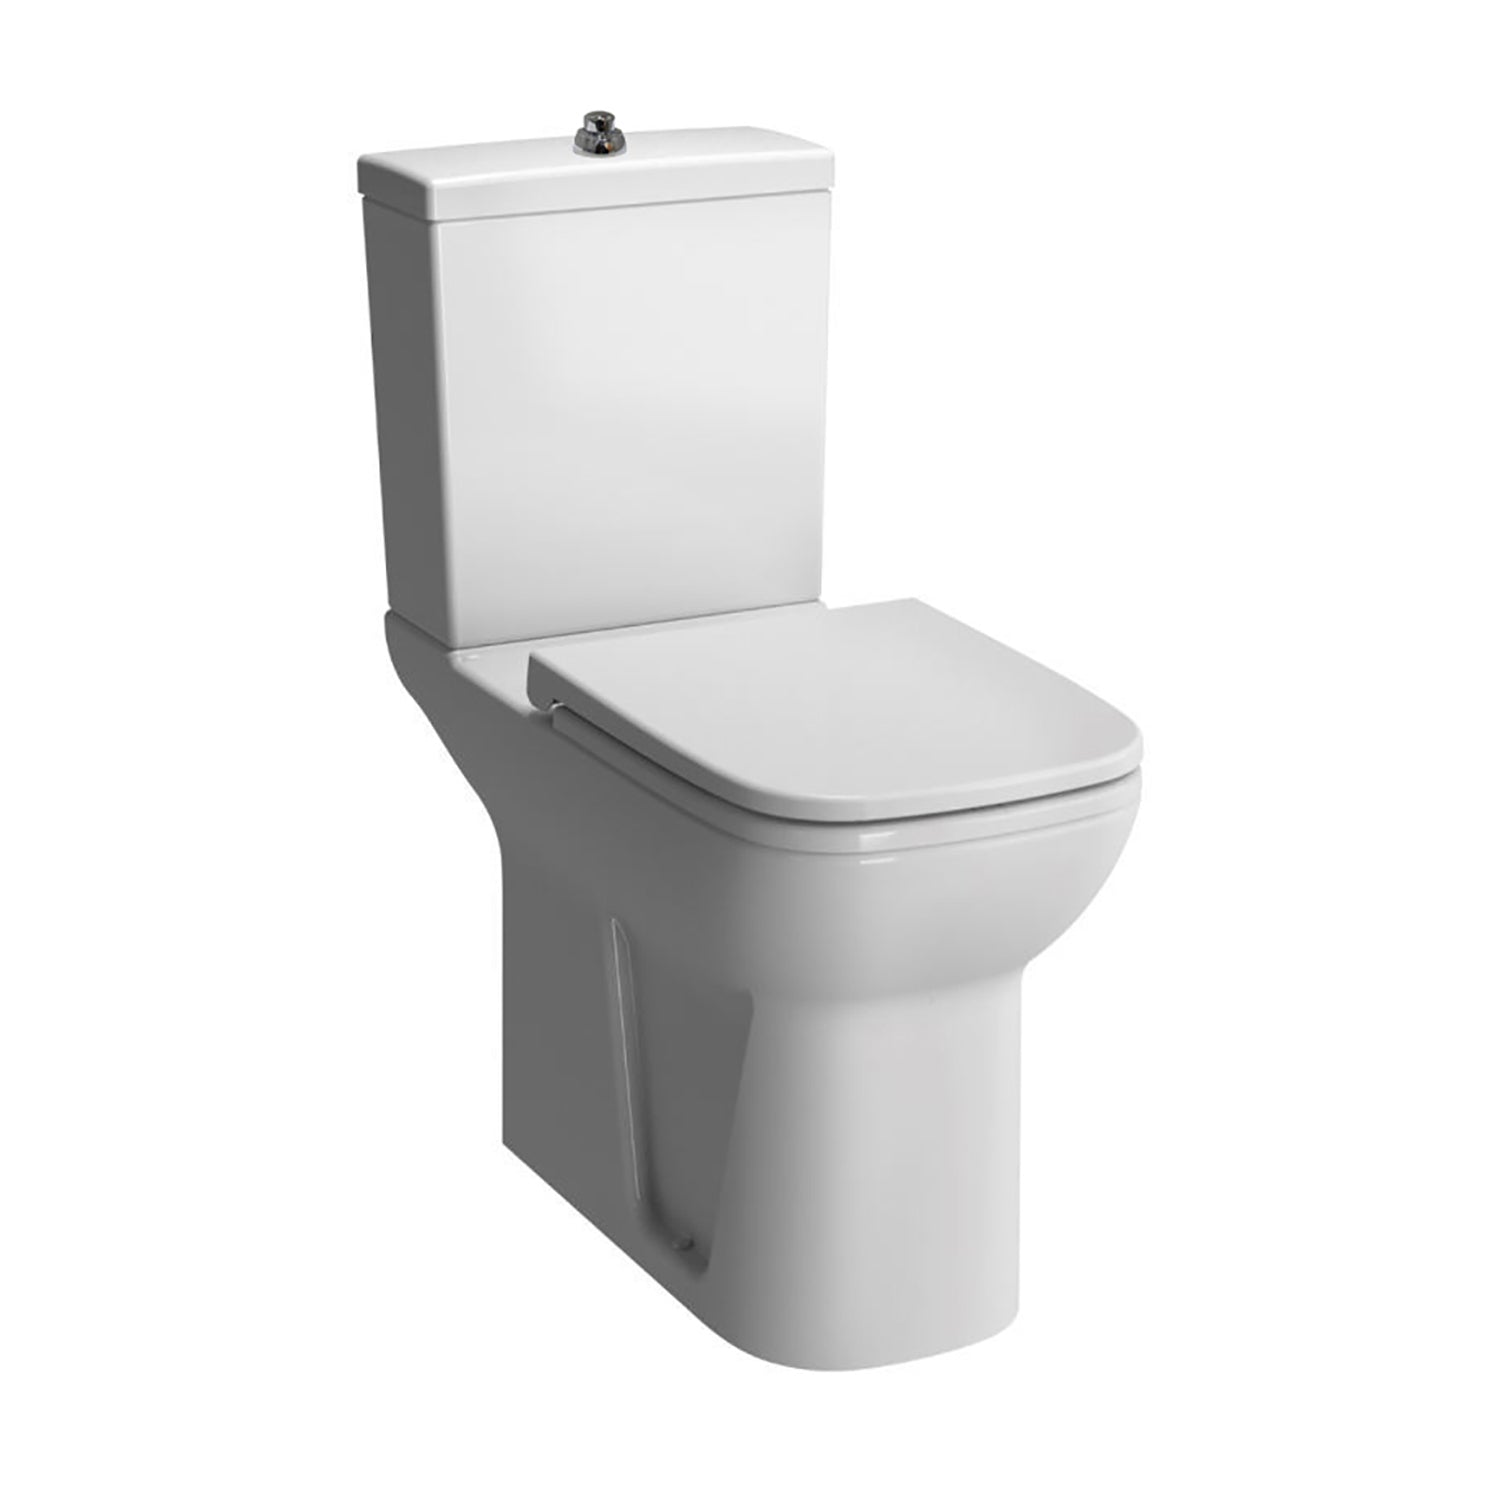 Consilio Comfort Height Close Coupled Toilet with the seat on a white background